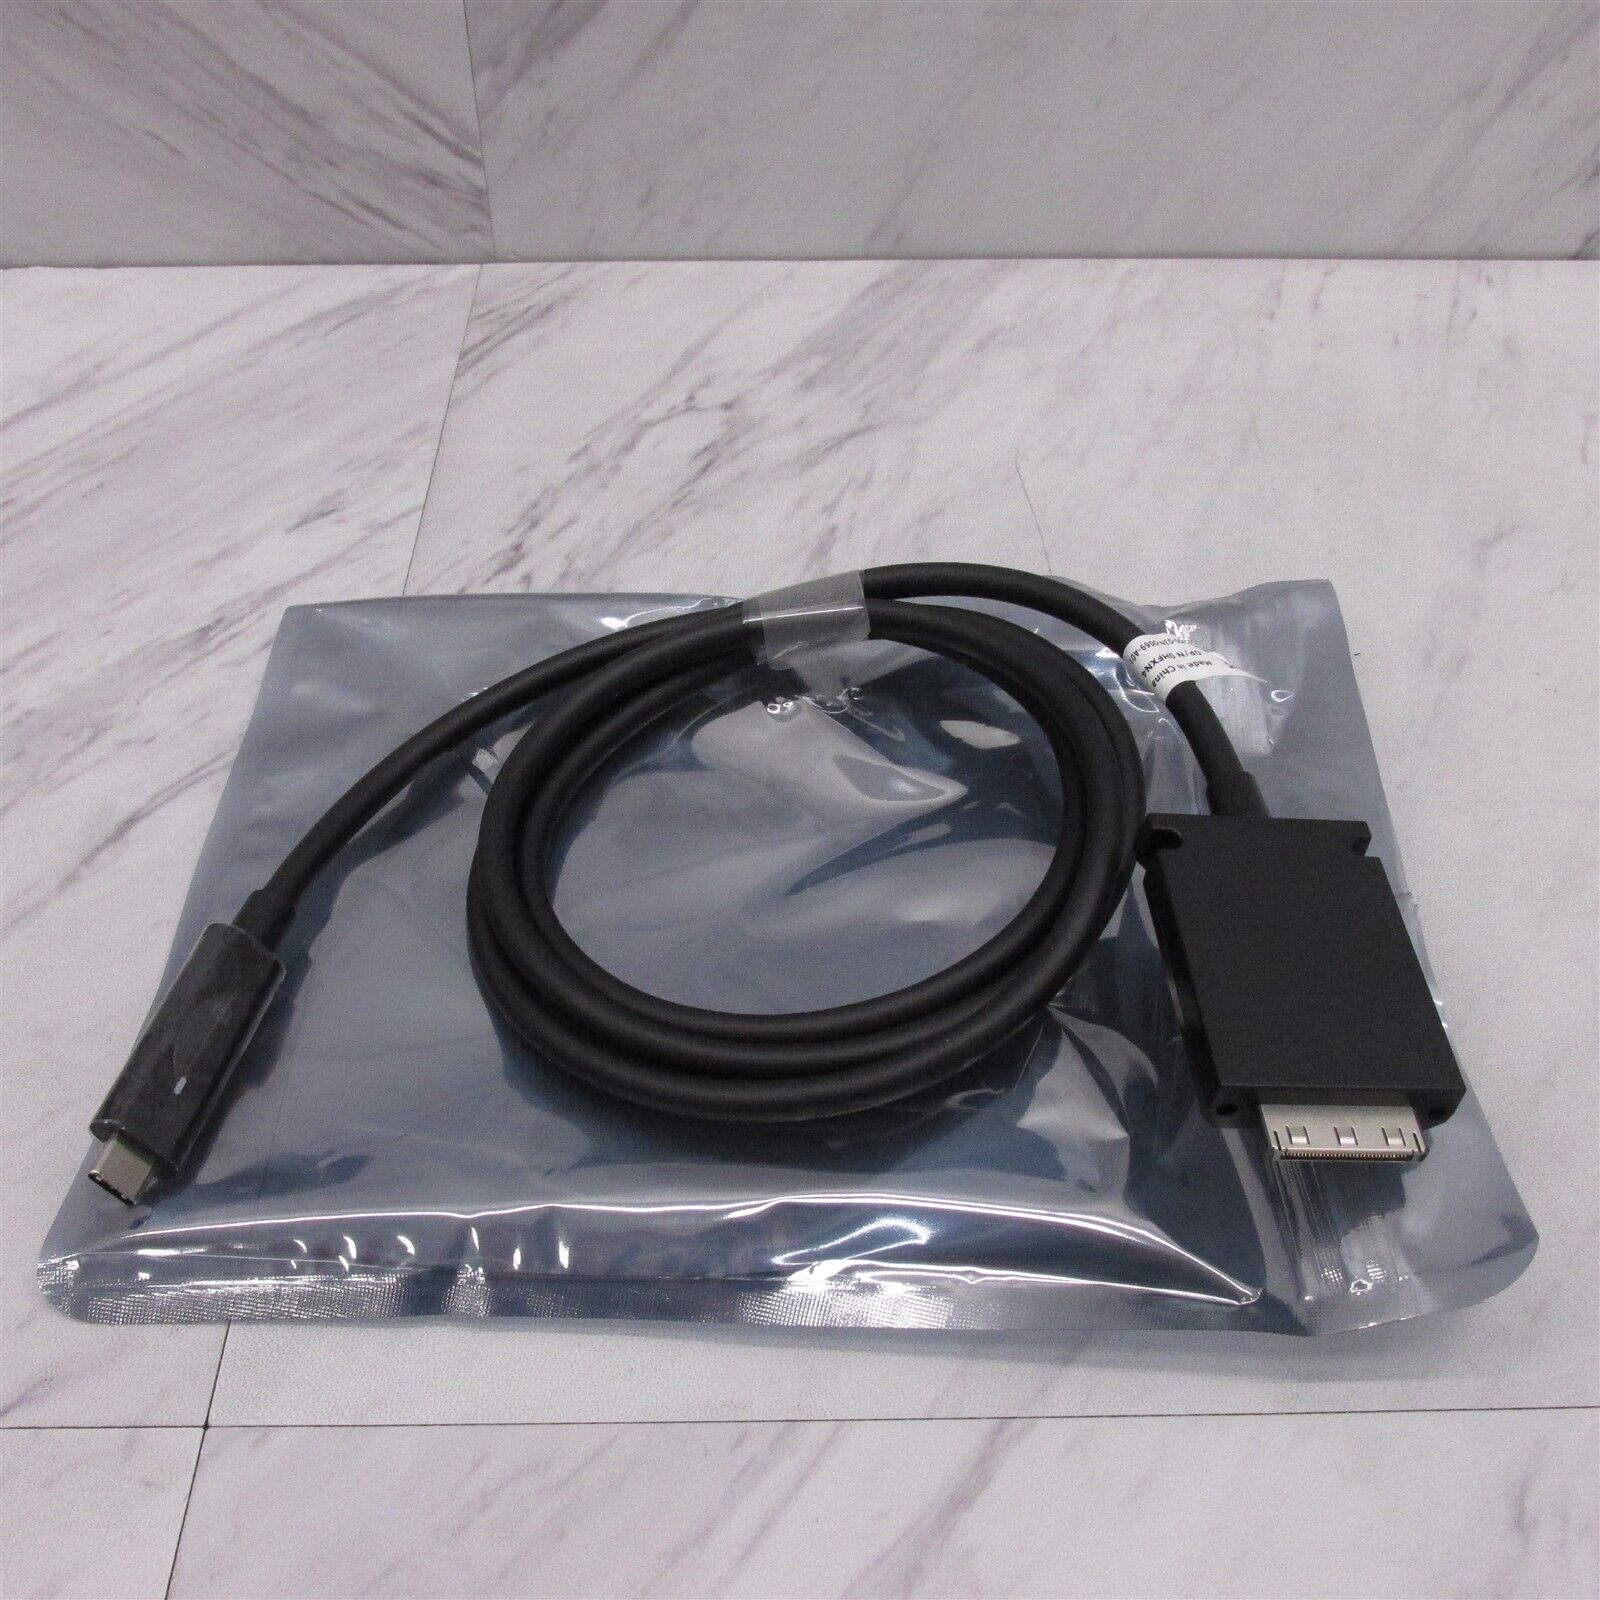 NEW Dell Replacement Docking Station USB-C Cable WD15 4K WD15 HFXN4 0HFXN4 